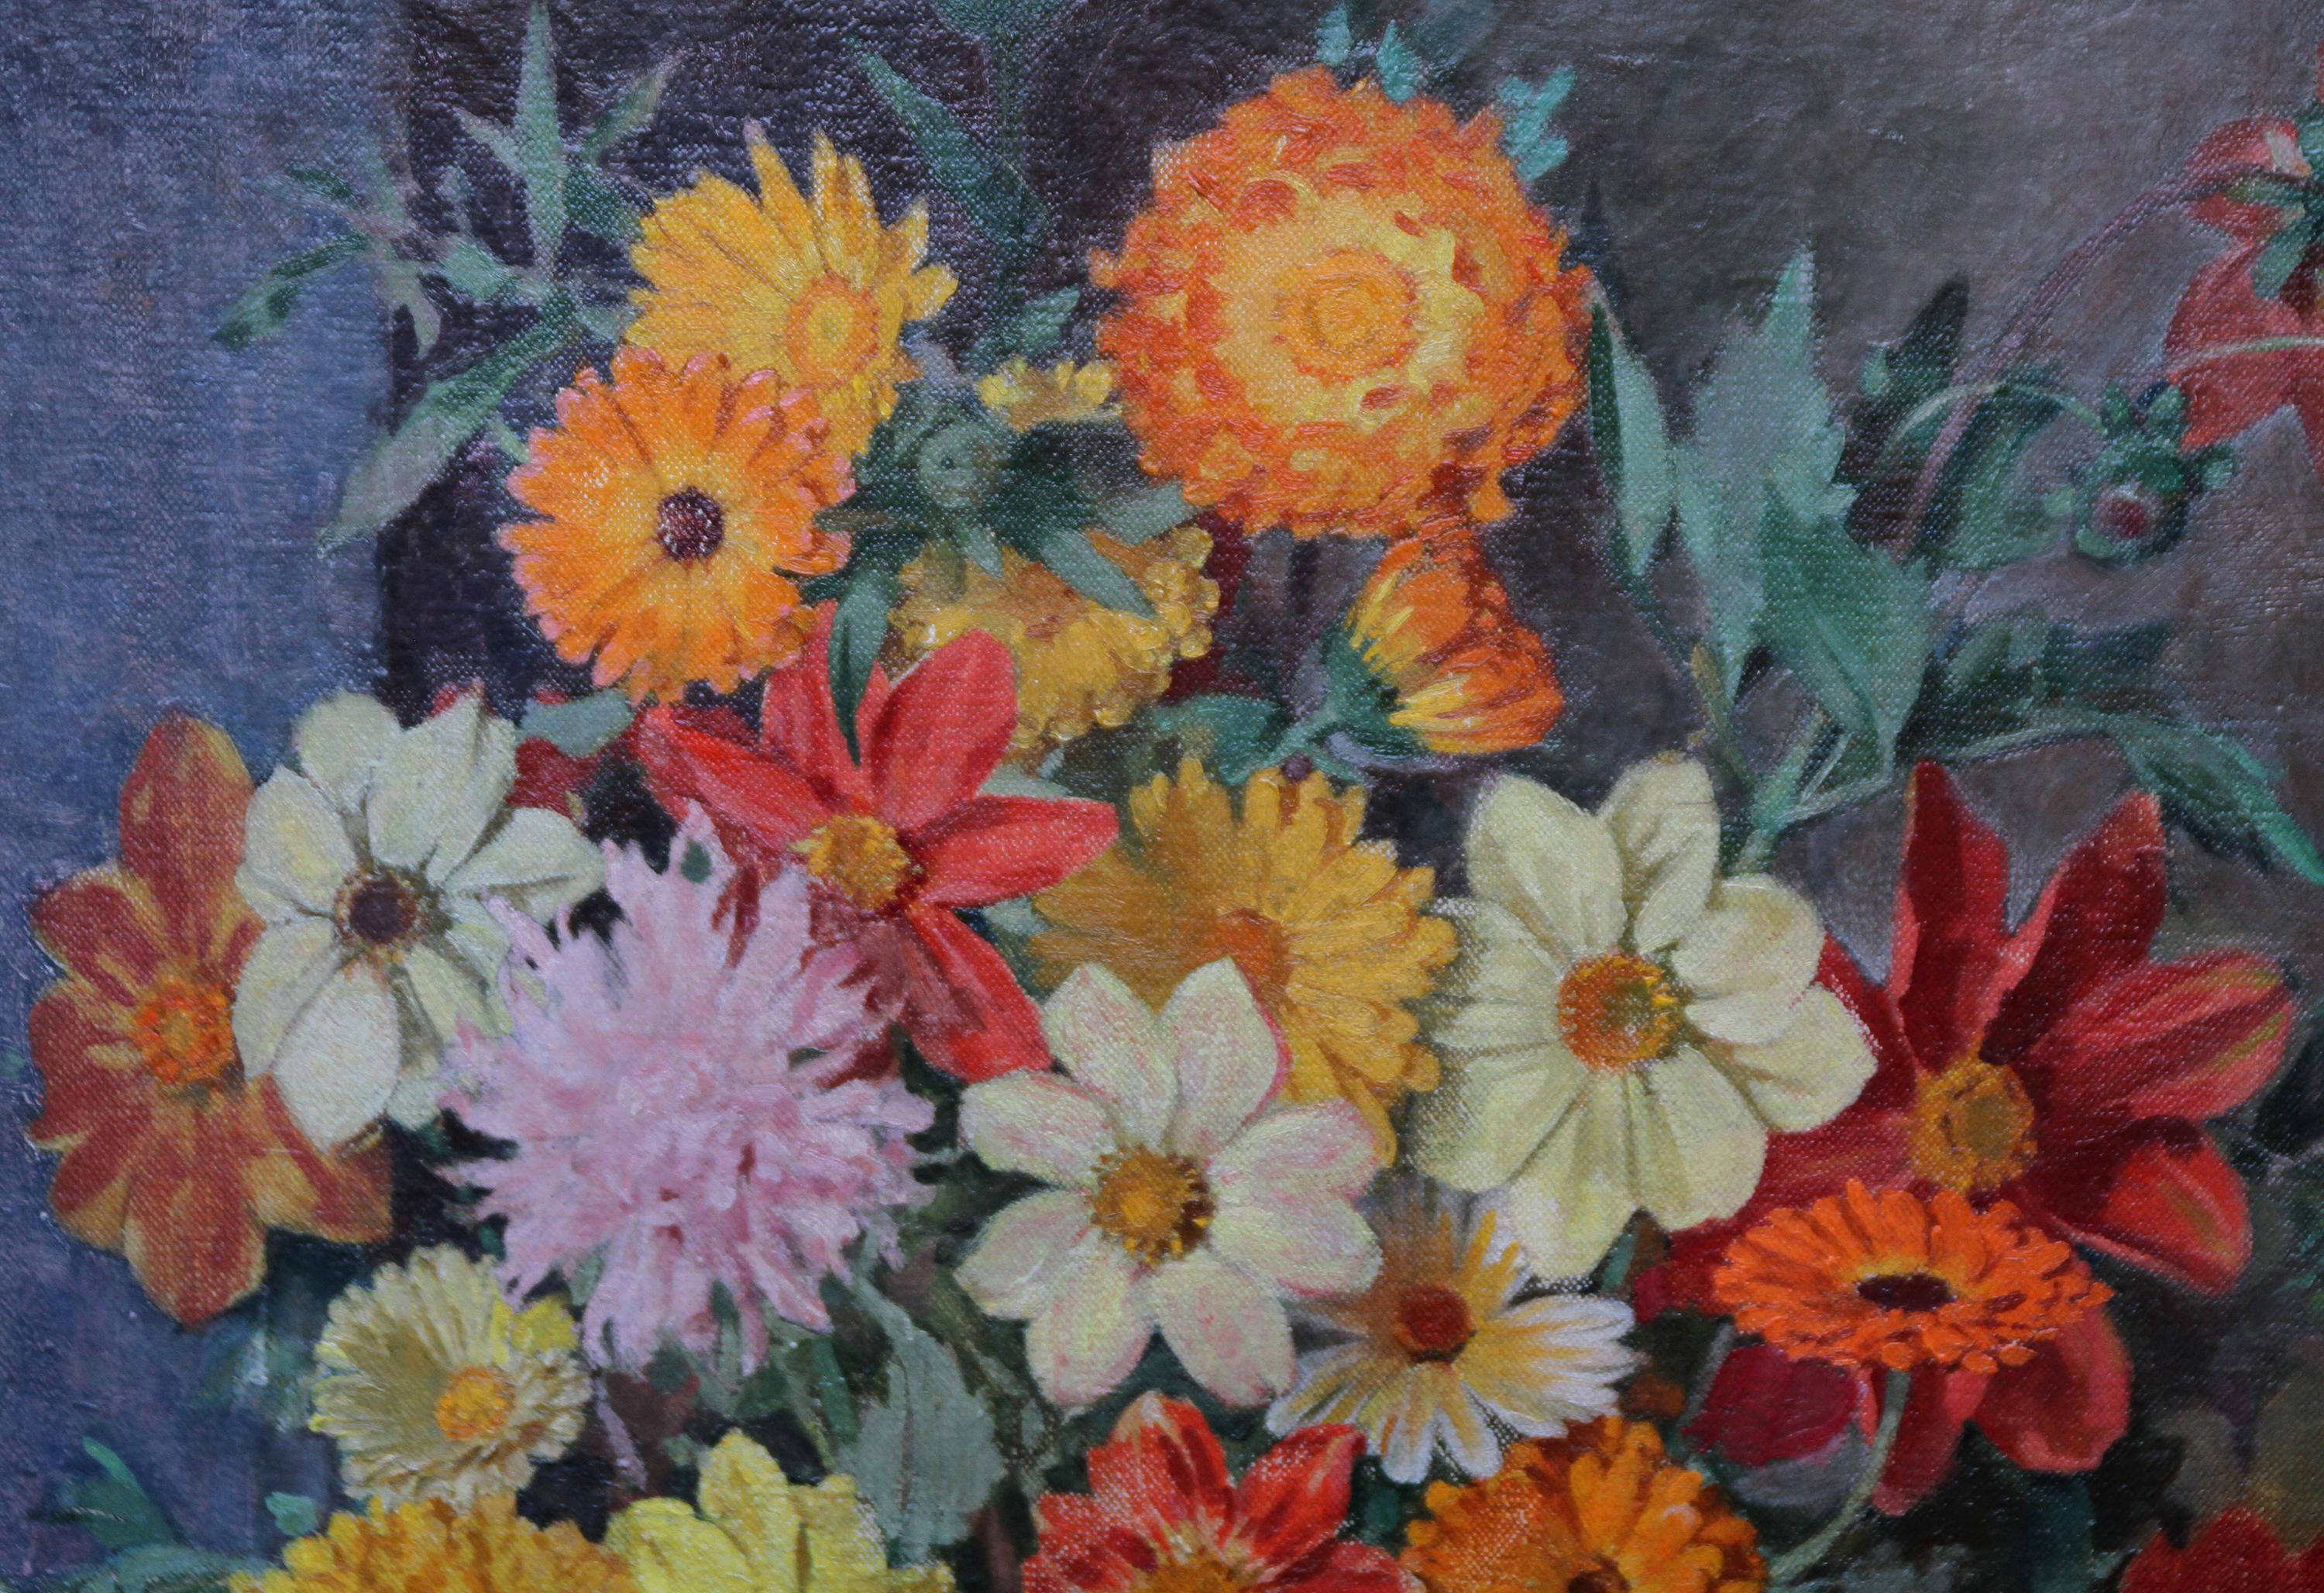 A fine floral oil painting by Scottish listed artist John M. Aiken.  This is a super oil on canvas painting of a floral arrangement entitled 